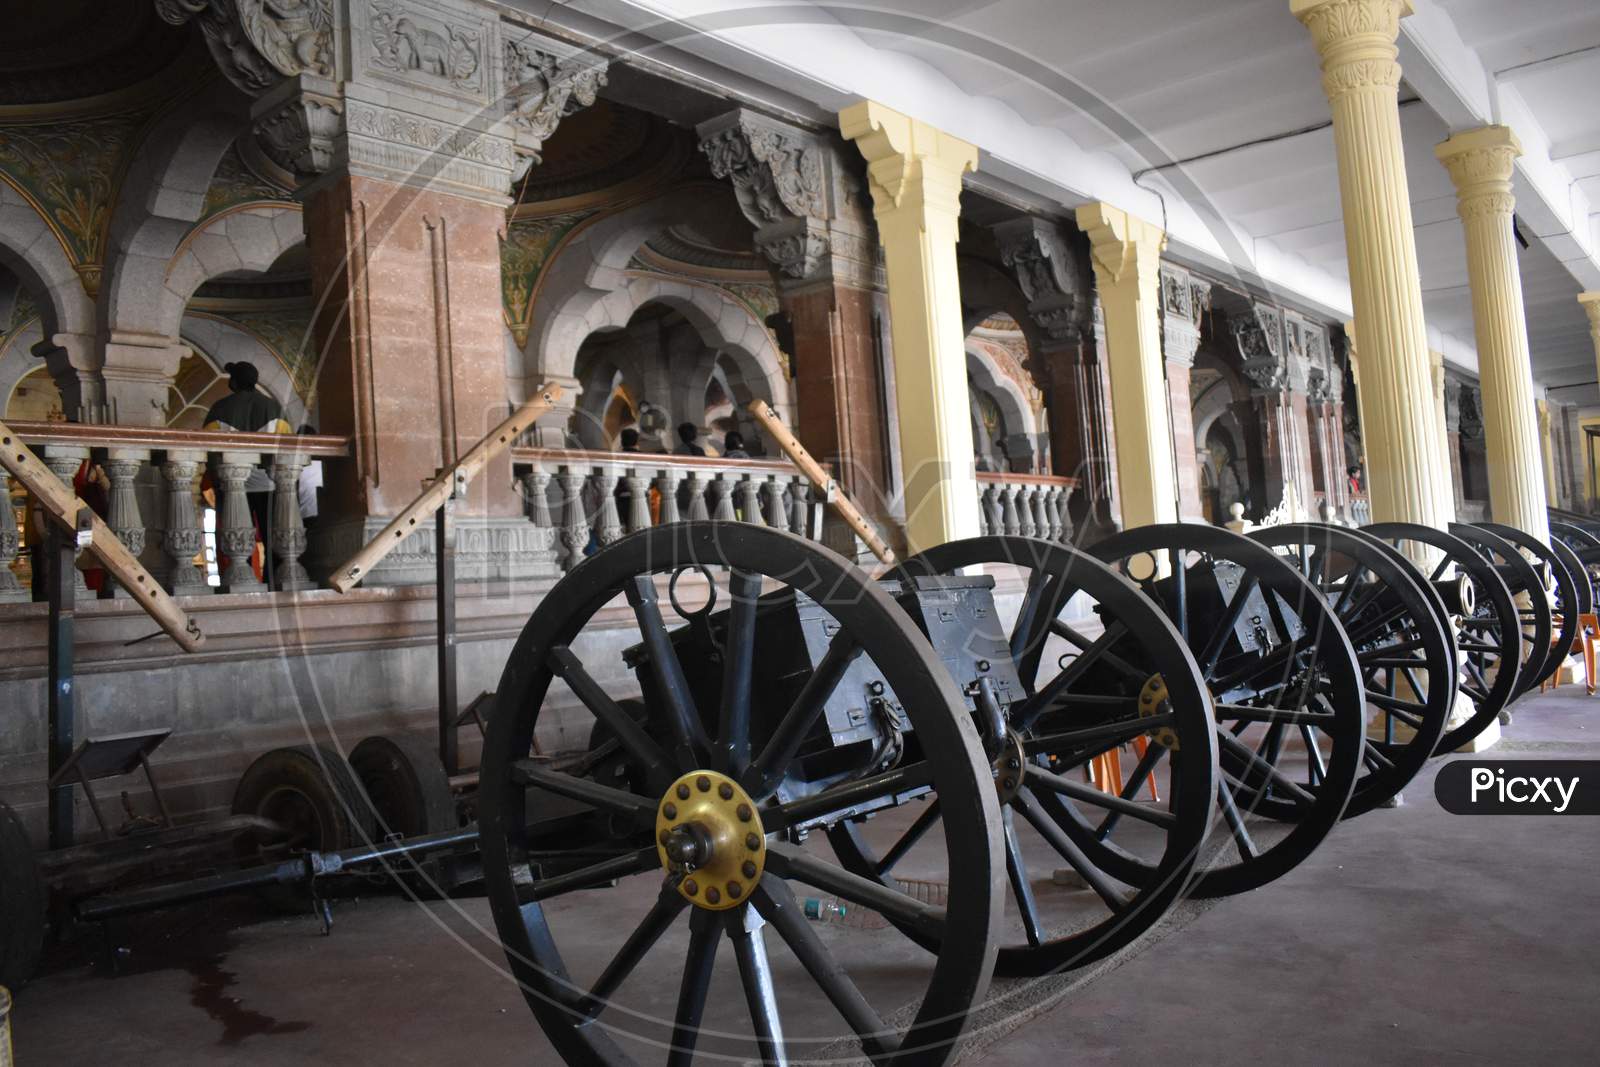 few ancient old canons used in the war are Placed in a museum